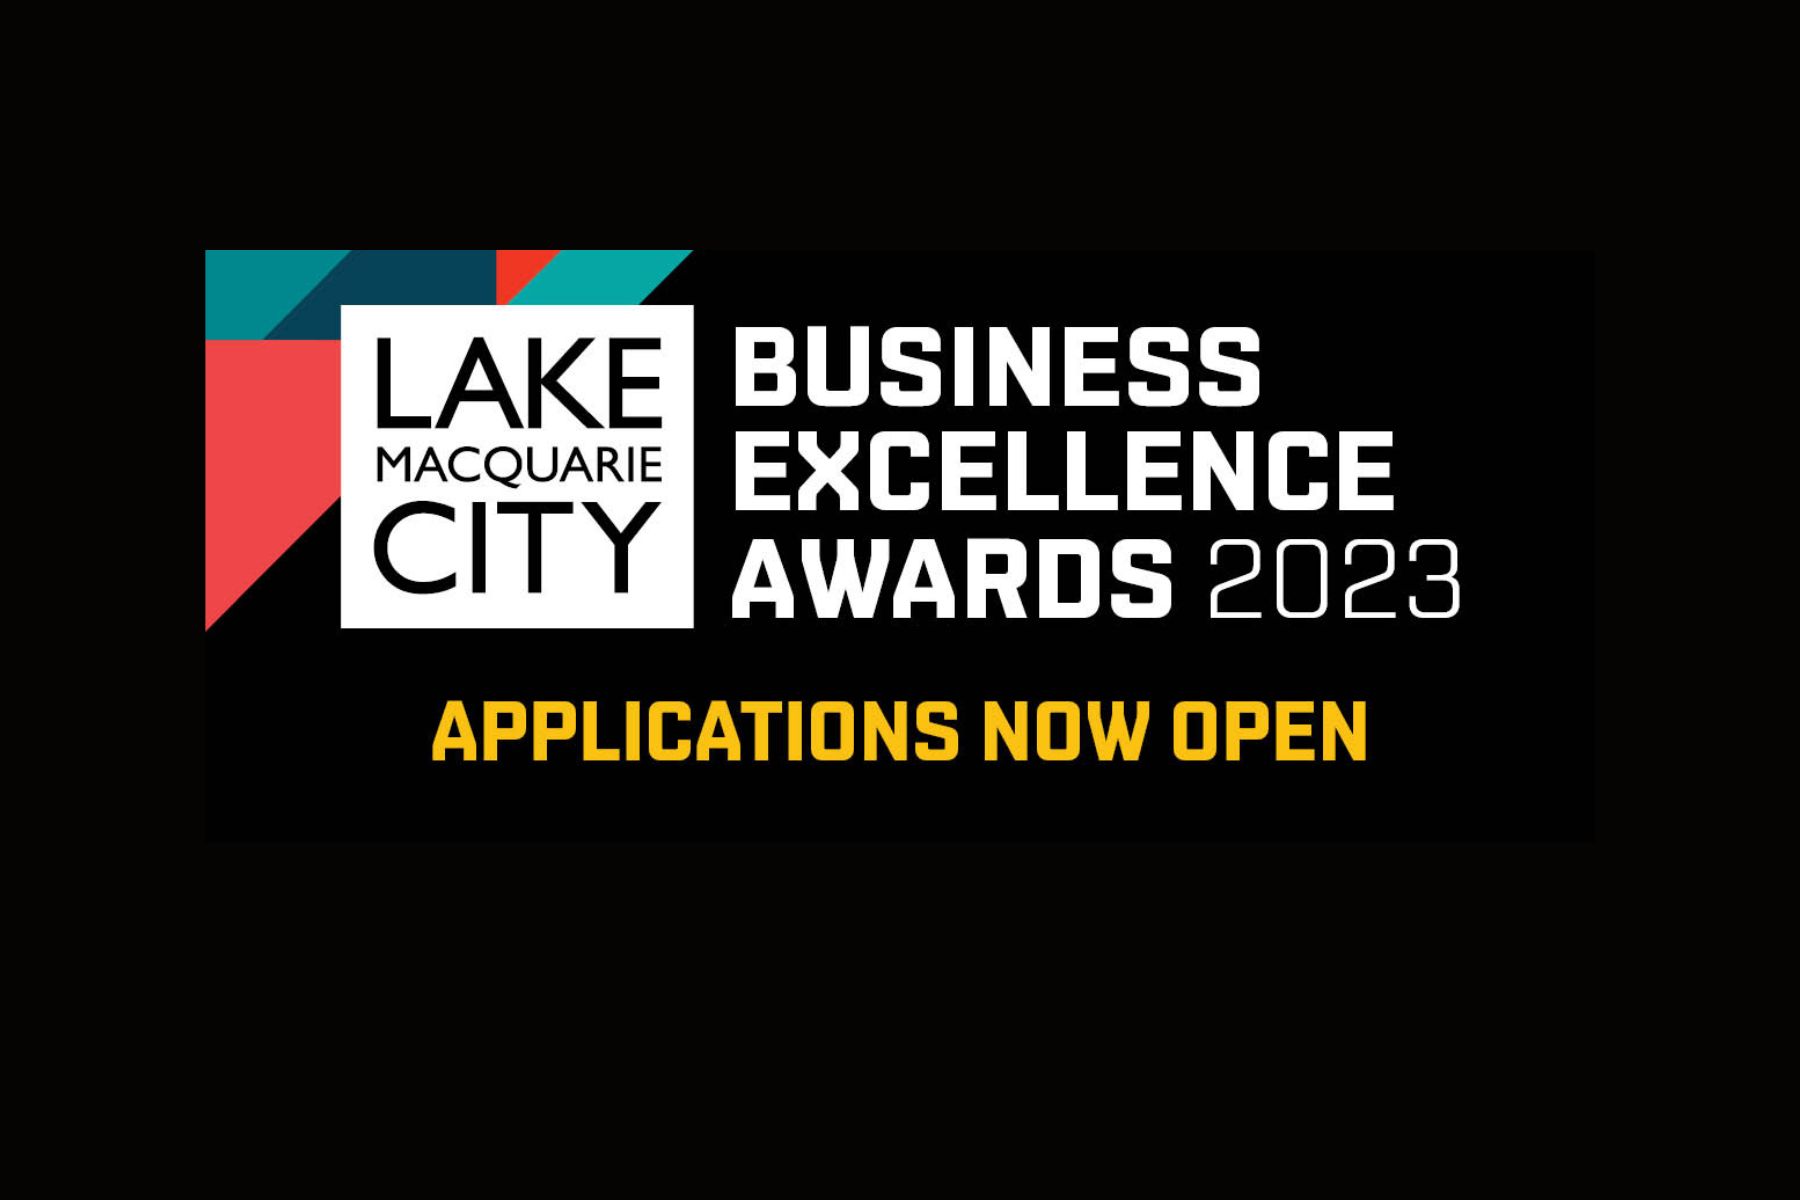 Lake-Macquarie-City-Business-Excellence-Awards-2023